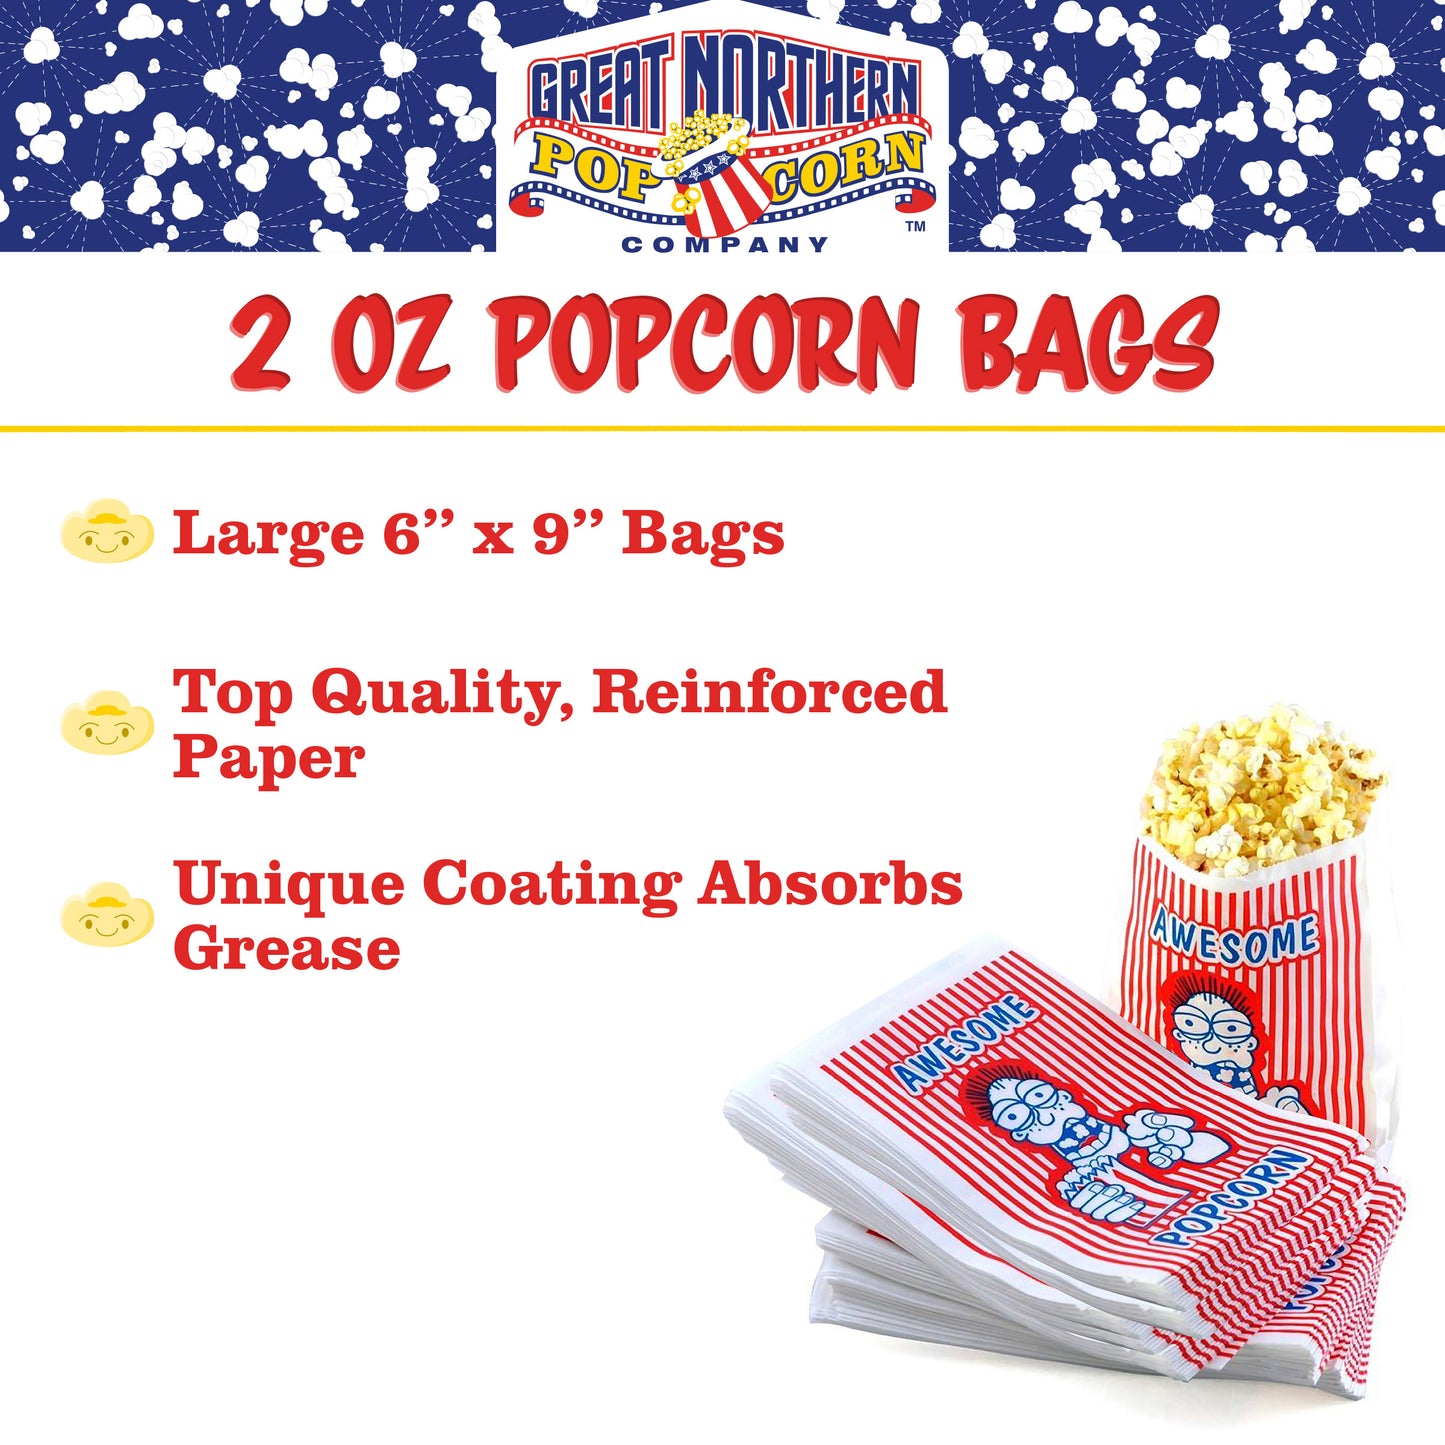 100 Popcorn Bags and 8 Ounce All-in-One Organic Popcorn Packs  – Case of 24